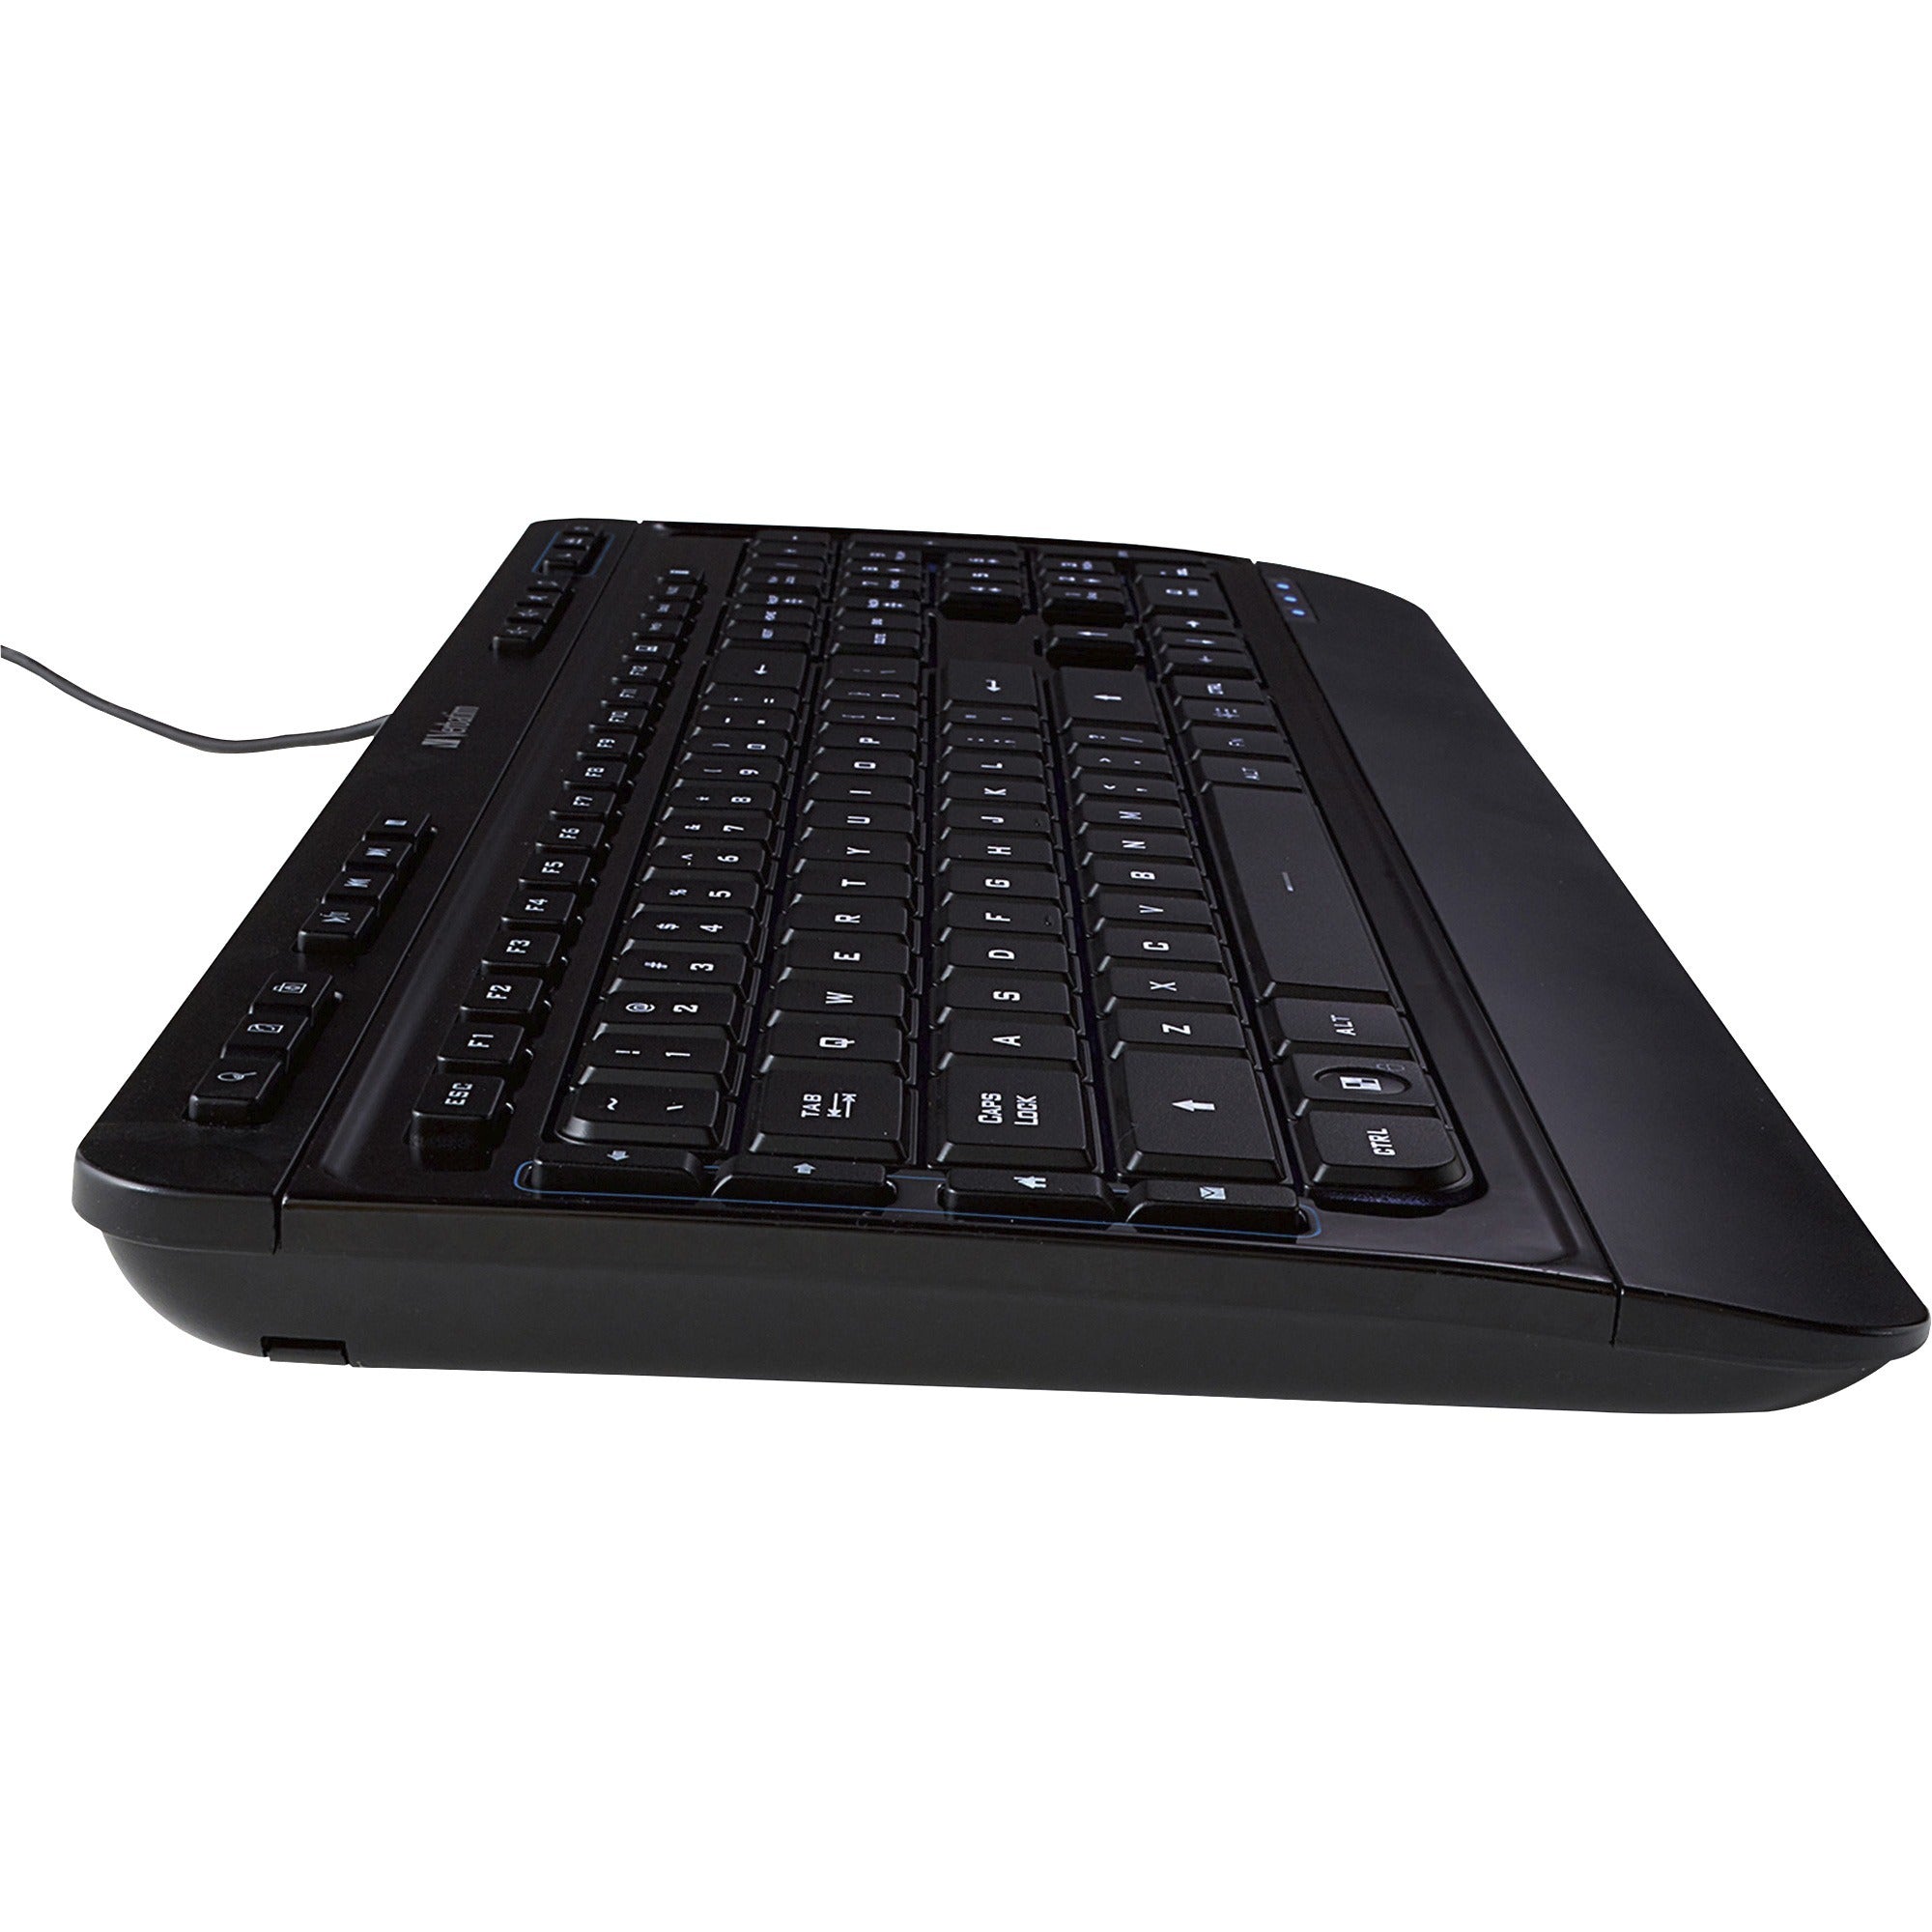 verbatim-illuminated-wired-keyboard-cable-connectivity-usb-type-a-interface-media-player-hot-keys-windows-mac-os-linux-black_ver99789 - 2